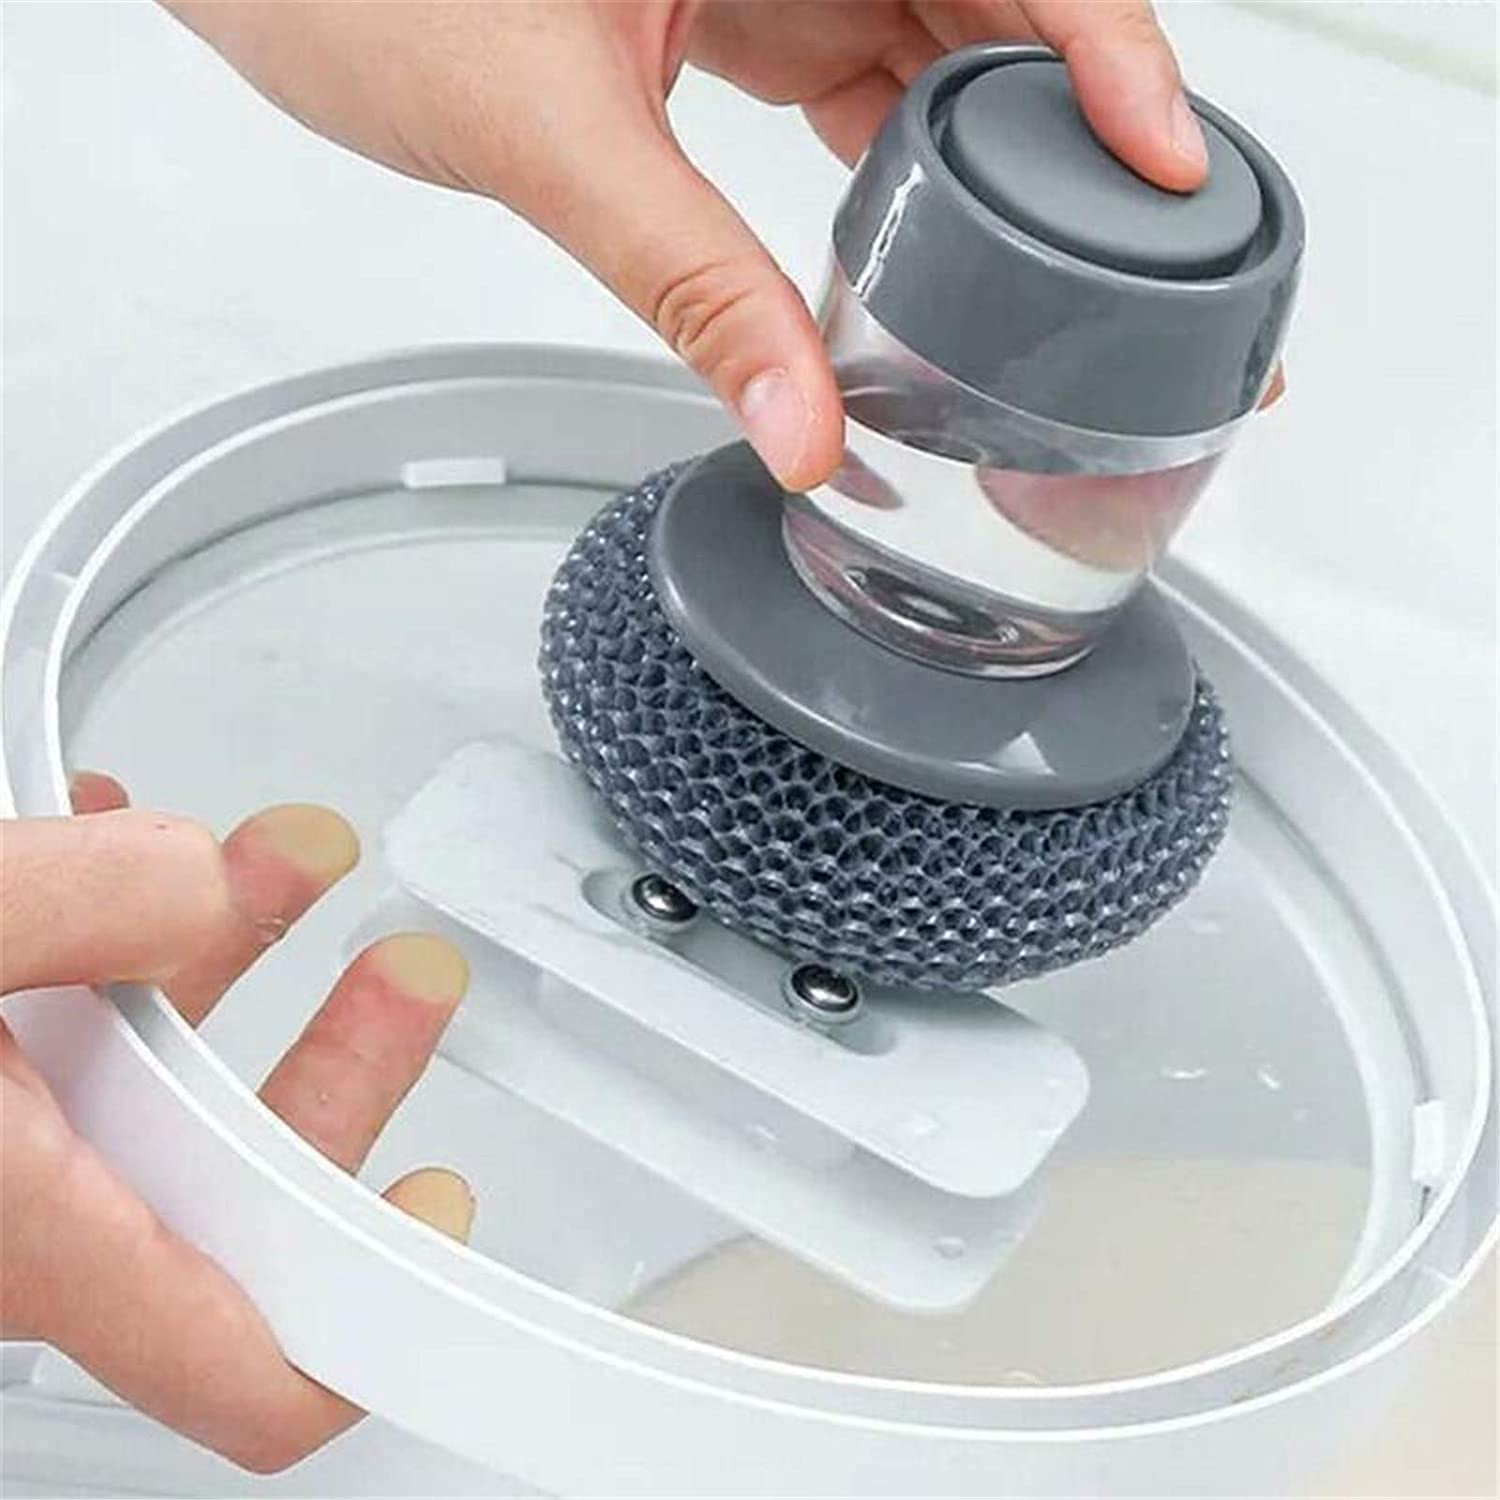 Soap Dispensing Palm Brush @ ₹ 149 Multifunctional Cleaning Brush with Push Button Kitchen Cleaning Tool Household